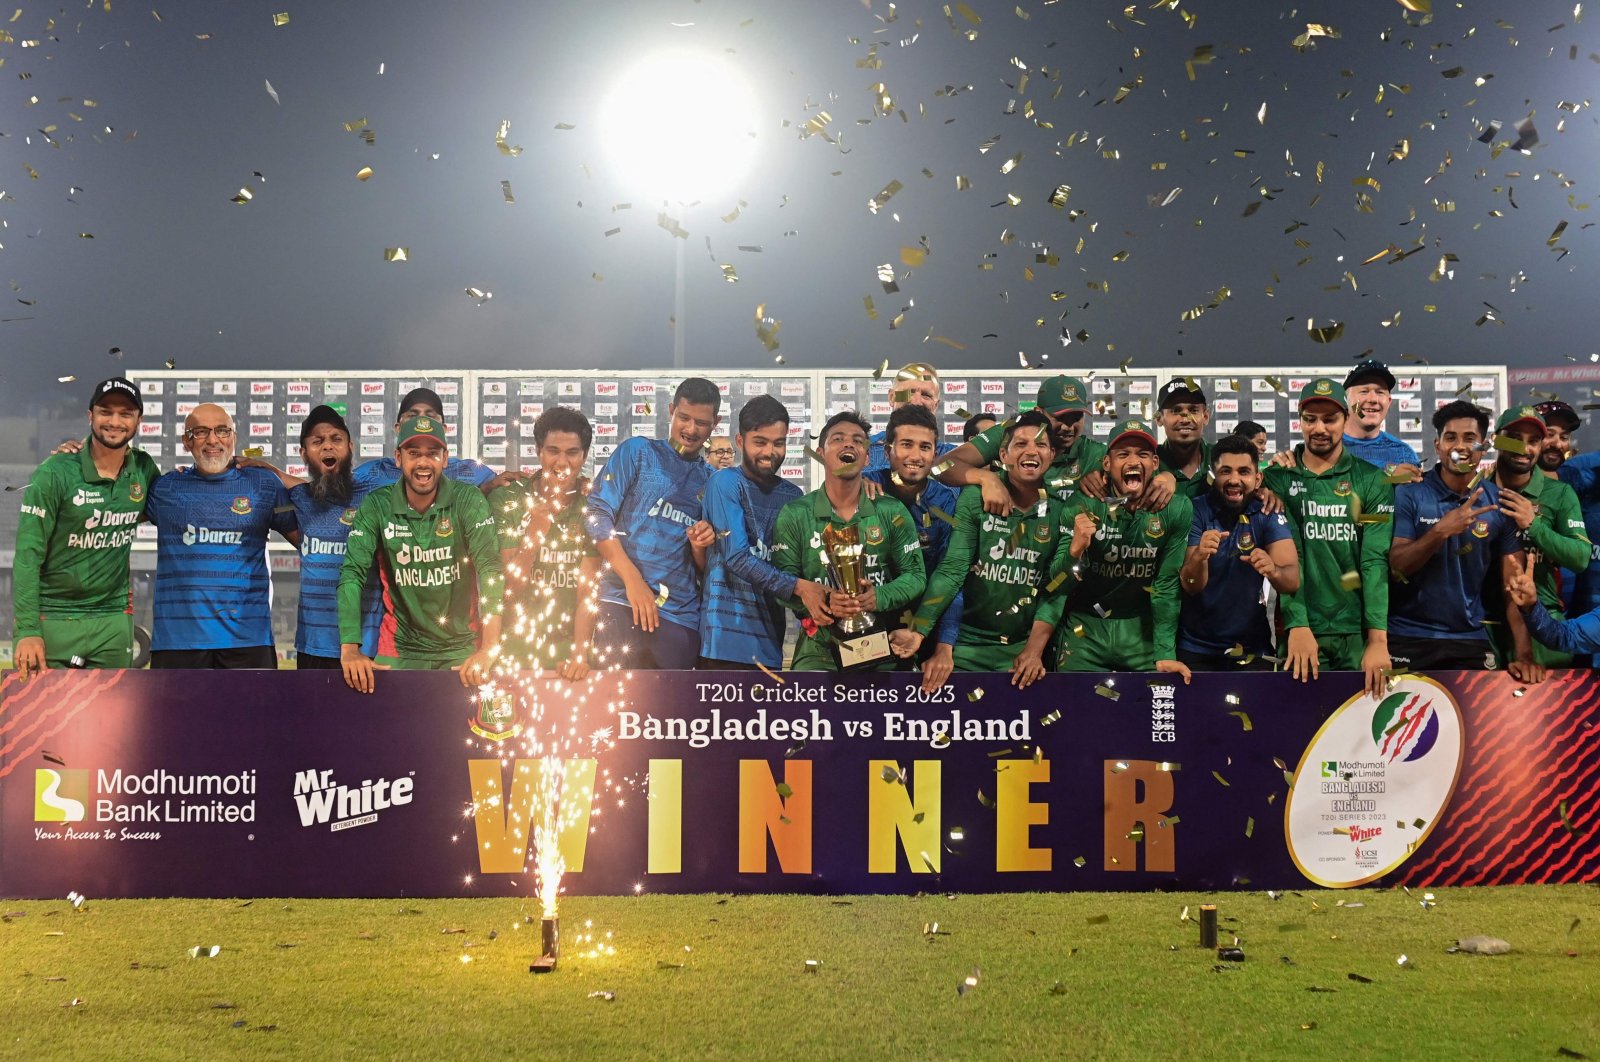 Bangladeshi players pose with the trophy after winning the Twenty20 international cricket series at the end of the third and final match against England at the Sher-e-Bangla National Cricket Stadium in Dhaka, March 14, 2023. (Munir uz ZAMAN/AFP)